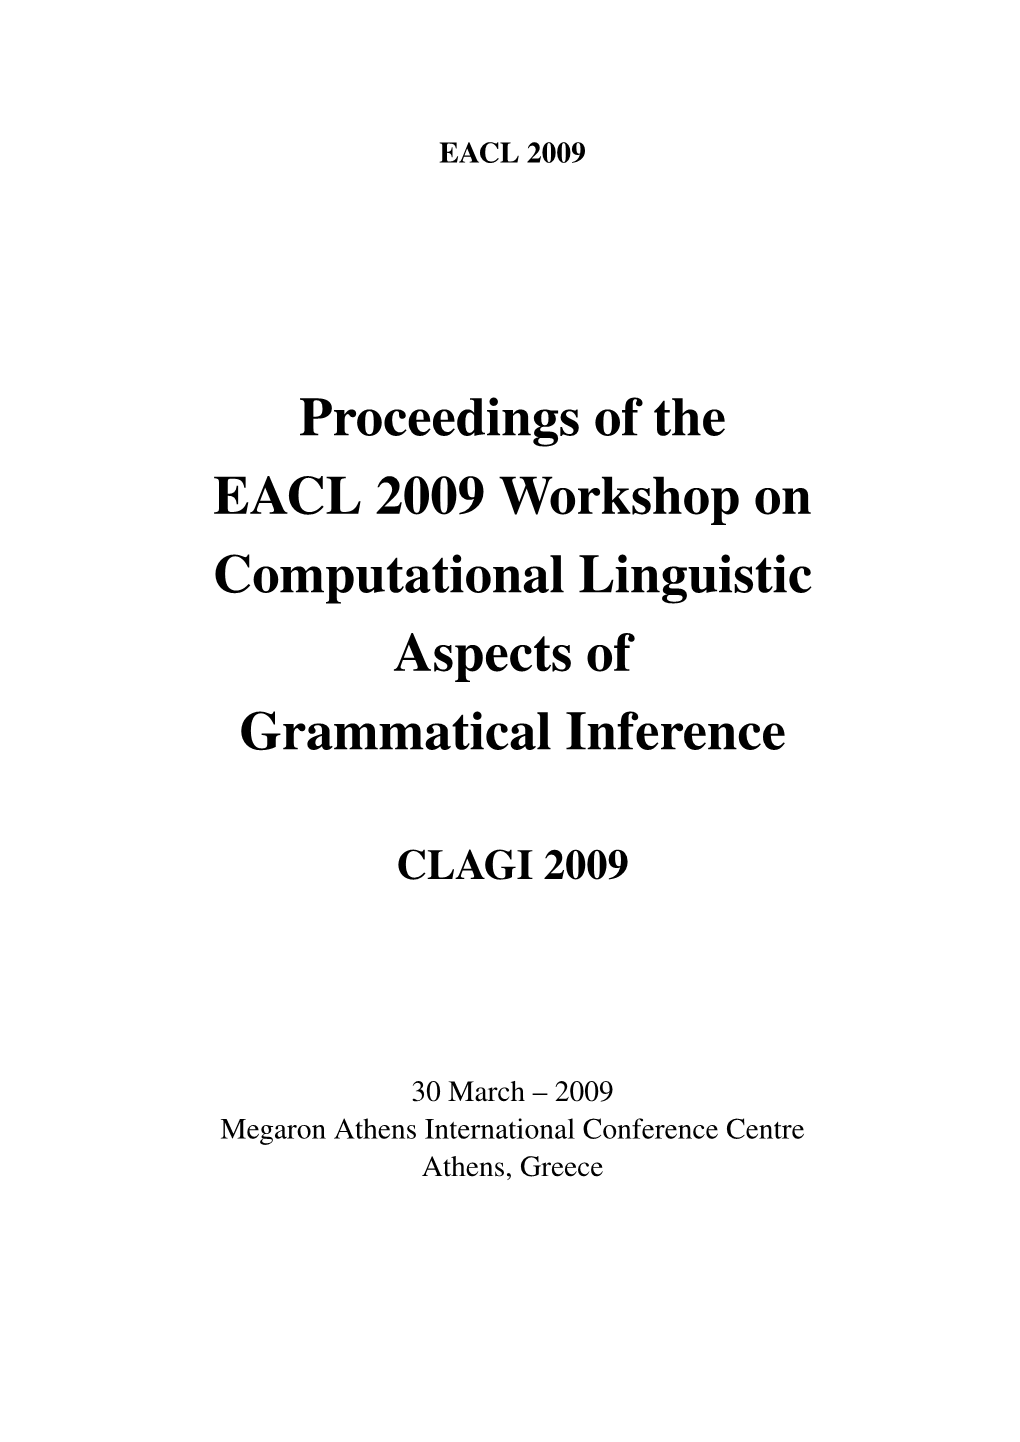 Proceedings of the EACL 2009 Workshop on Computational Linguistic Aspects of Grammatical Inference